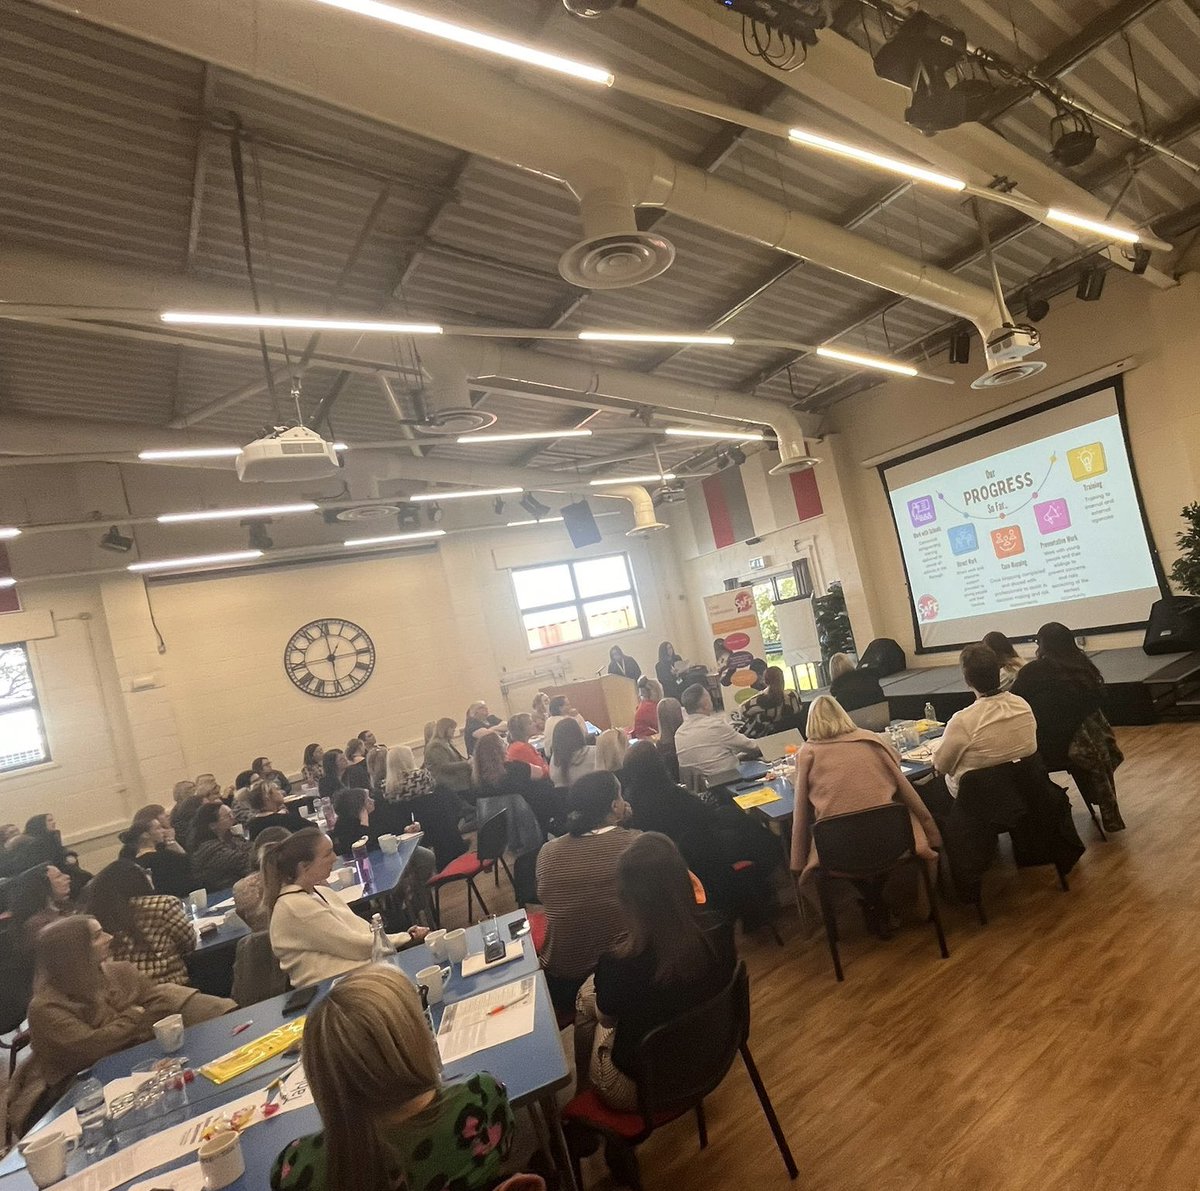 WOW! Our SAFE Launch was amazing, great turnout and so many multi agency partners! Thanks to all who attended. Can’t wait to next reach out into the community 🙌🏼 #SAFEteamRCBC #exploitation #contextualsafeguarding @PSWRedcar @RedcarCleveland